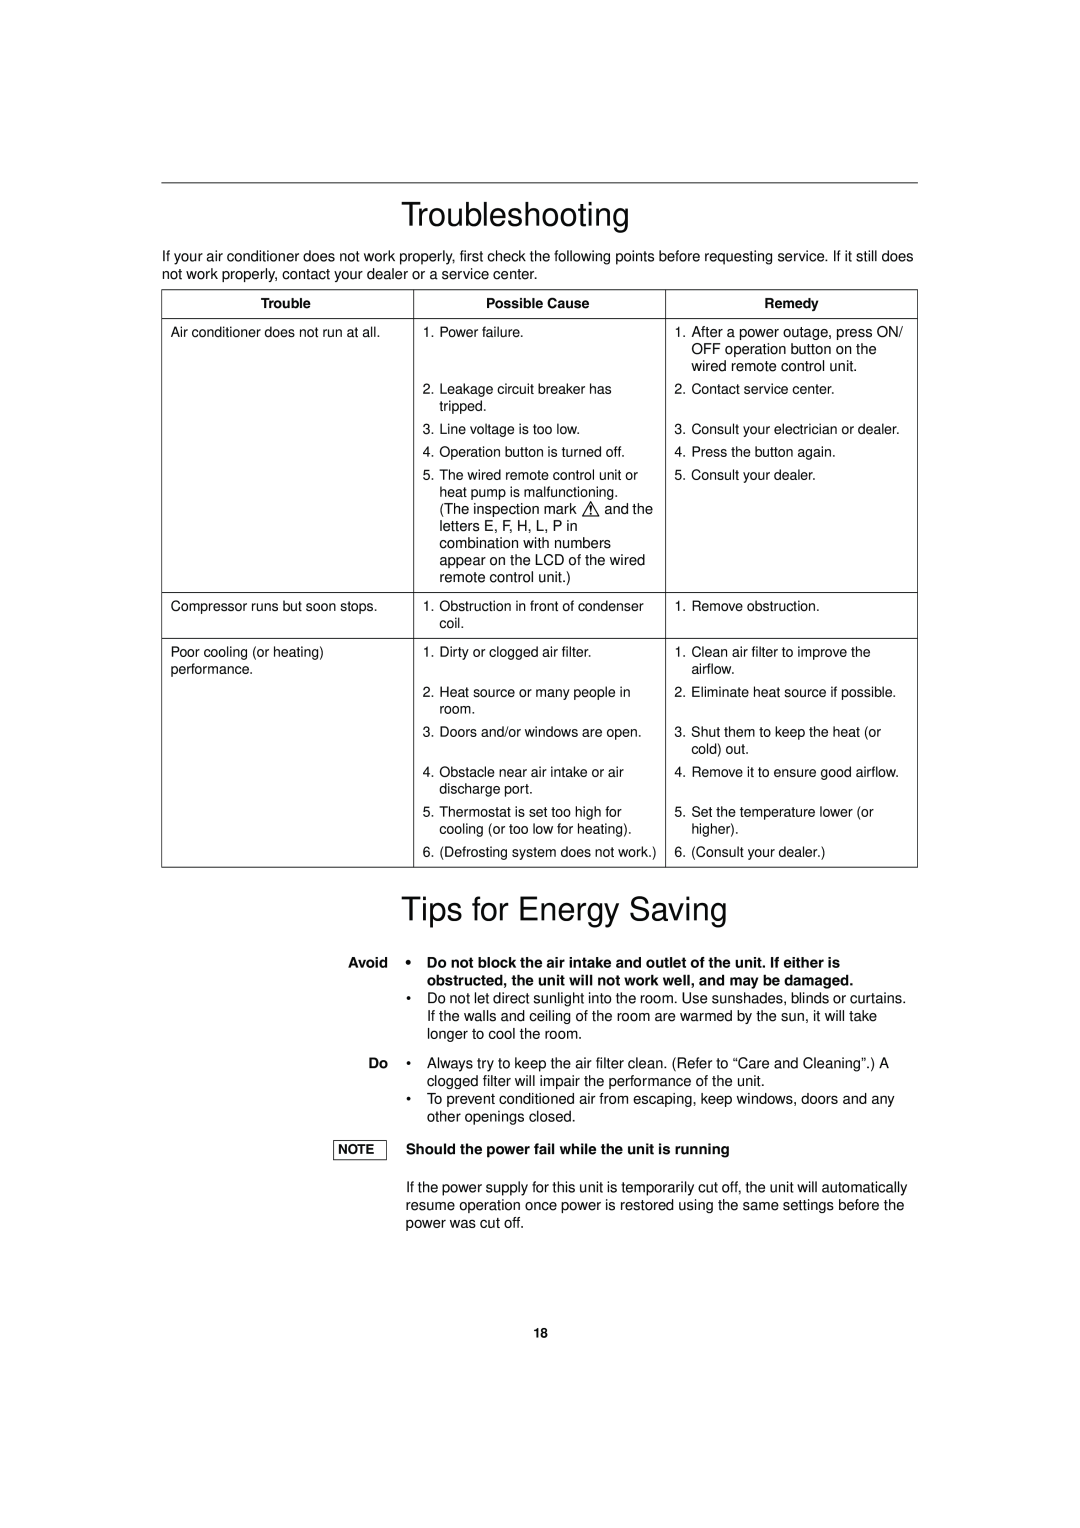 Sanyo SPW-FTR124EH56 operation manual Troubleshooting, Tips for Energy Saving, Possible Cause, Remedy 